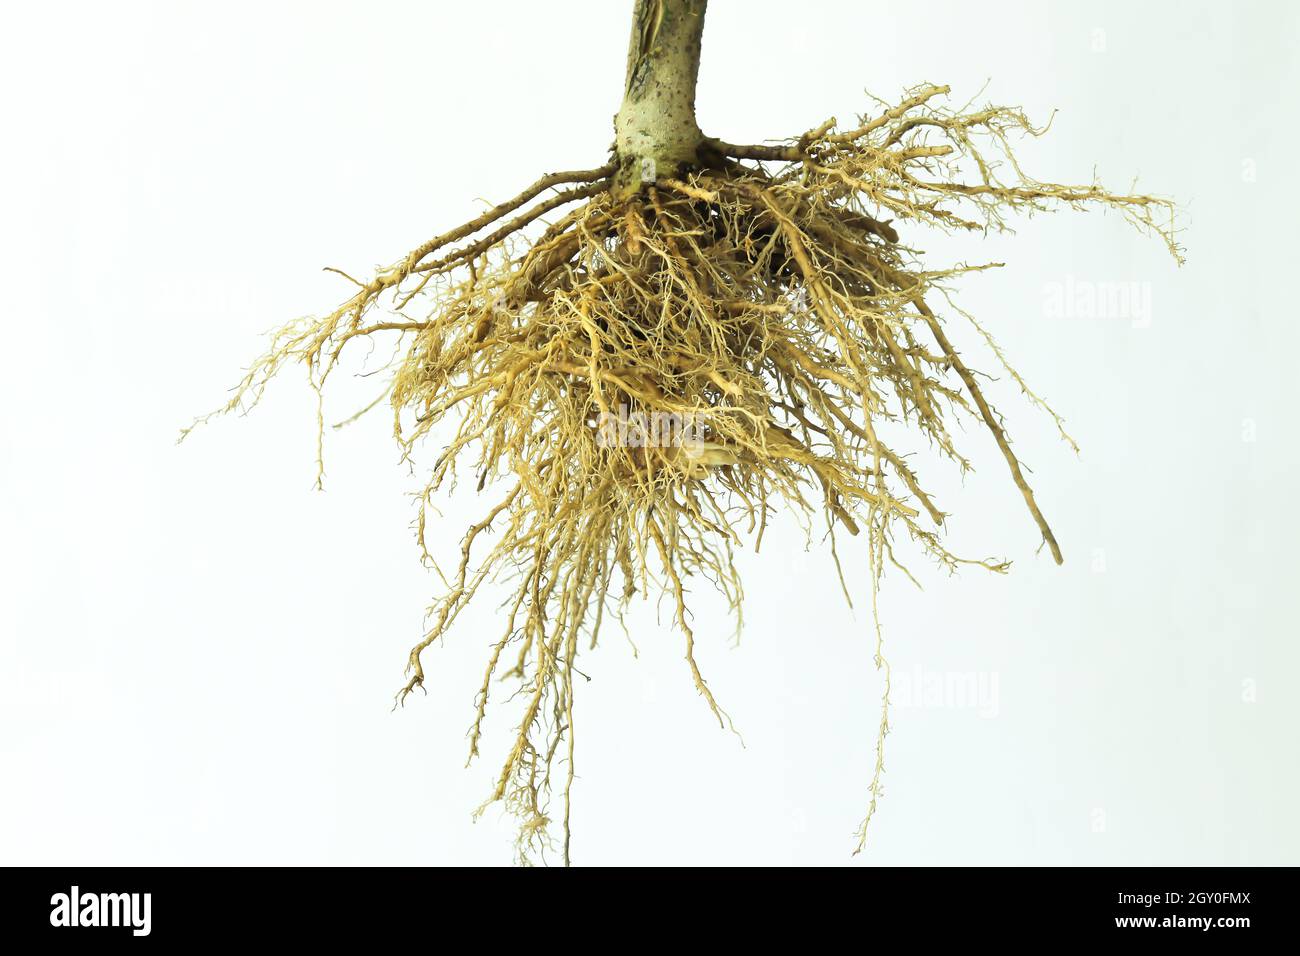 Tree roots on a white background. A fibrous root system. Stock Photo